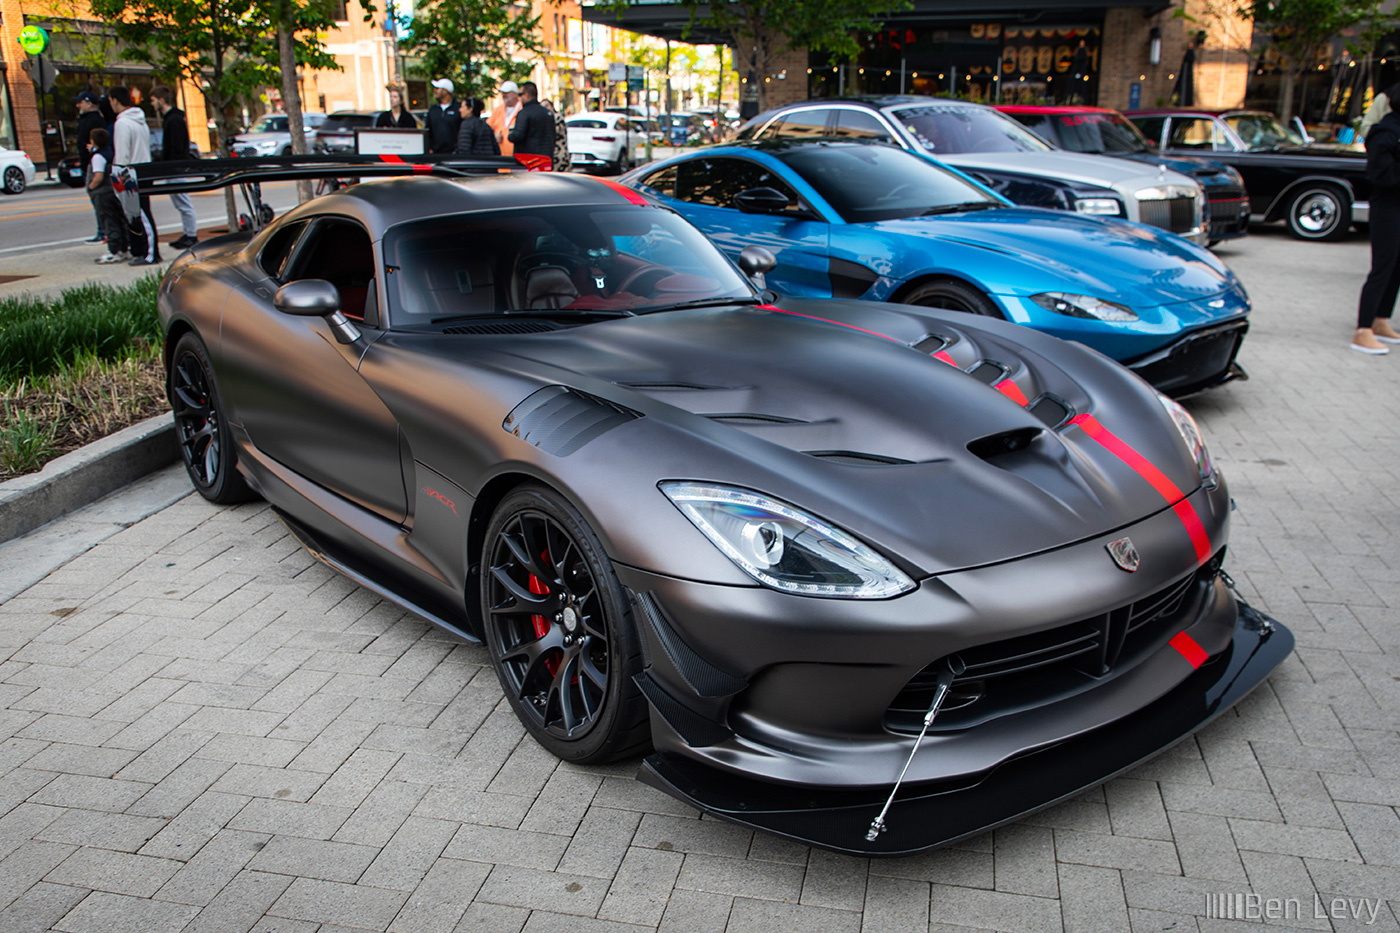 Turbo Dodge Viper ACR at Cars at Lincoln Common in Chicago